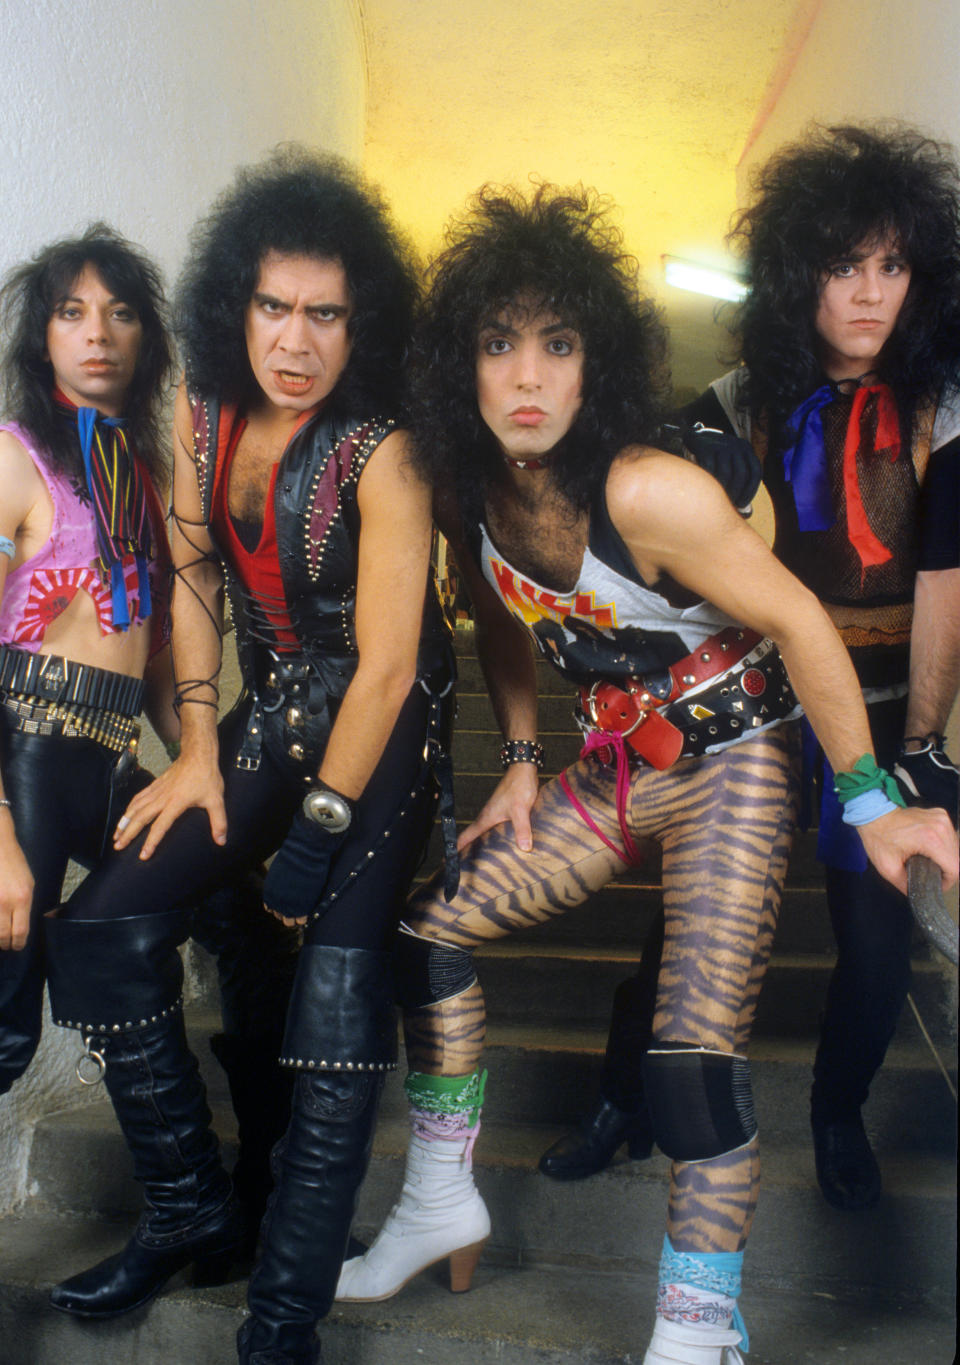 Vinnie Vincent, Gene Simmons, Paul Stanley, and Eric Carr, November 1983. (Fryderyk Gabowicz/picture alliance via Getty Images)